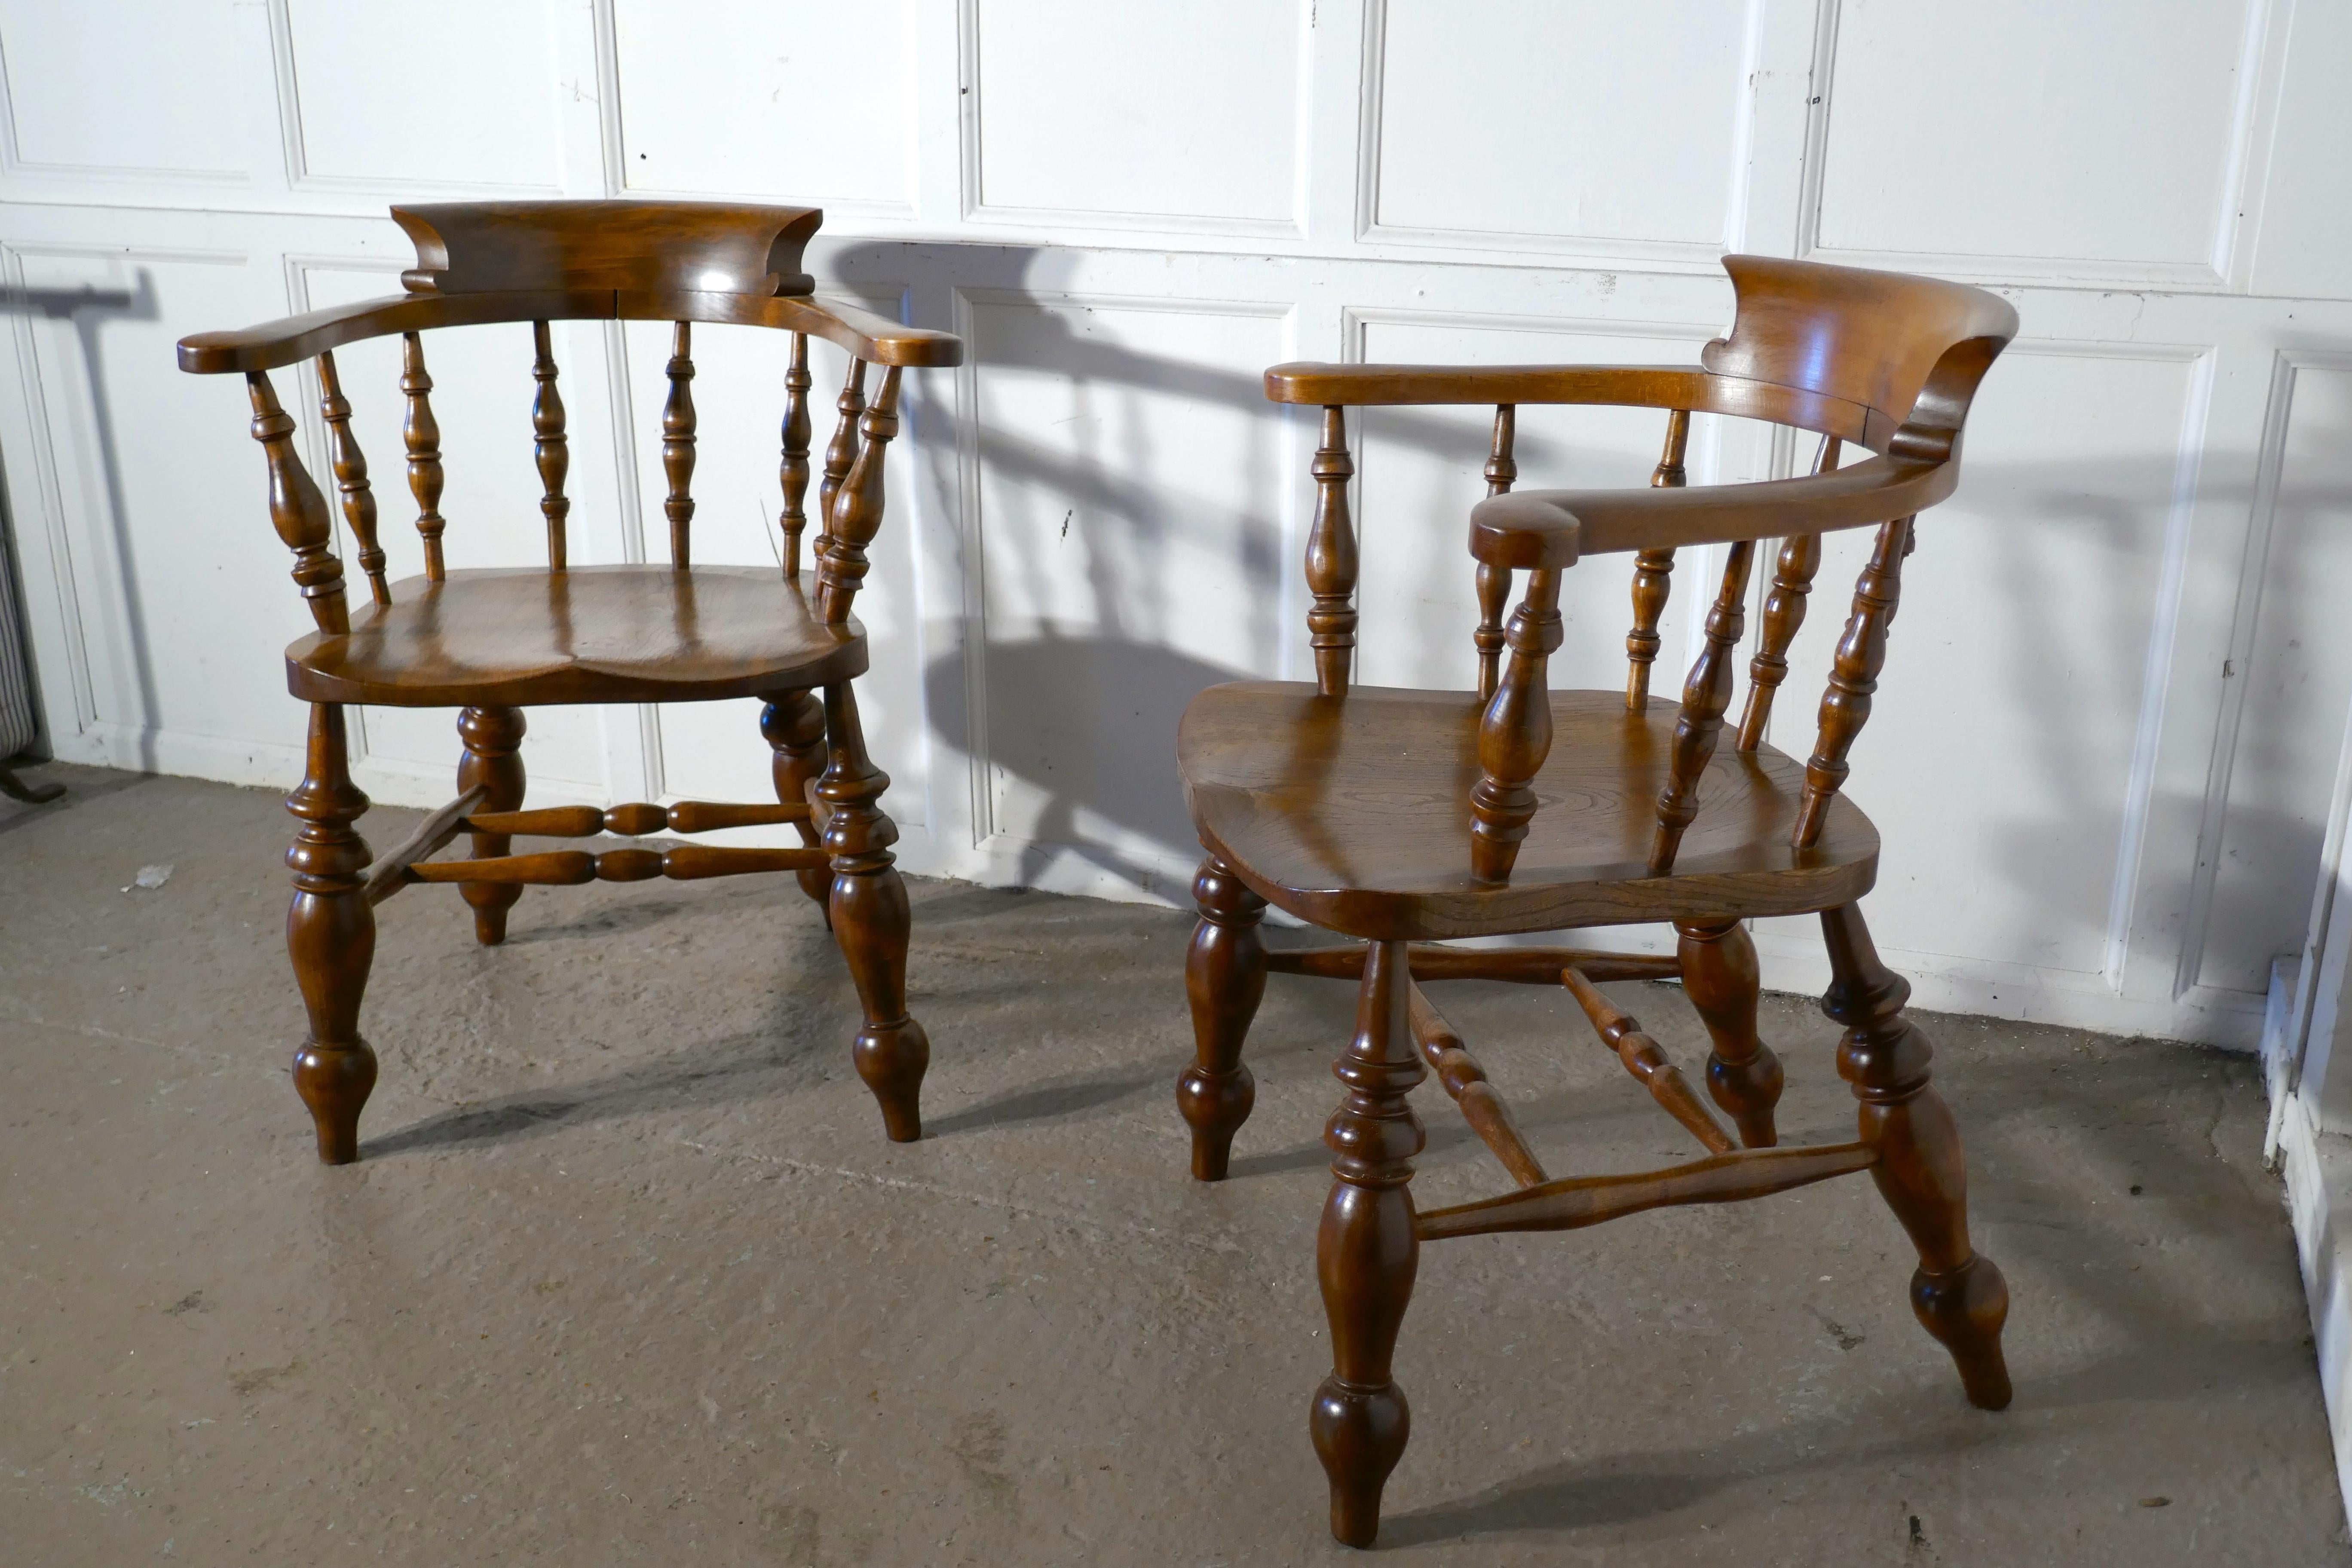 A pair of chunky elm smokers bow office or desk chairs

These large solid elm and beech chairs have attractive curving backs with a very wide curved top rail and turned spindles beneath 

The chairs stand on chunky, sturdy turned legs and have